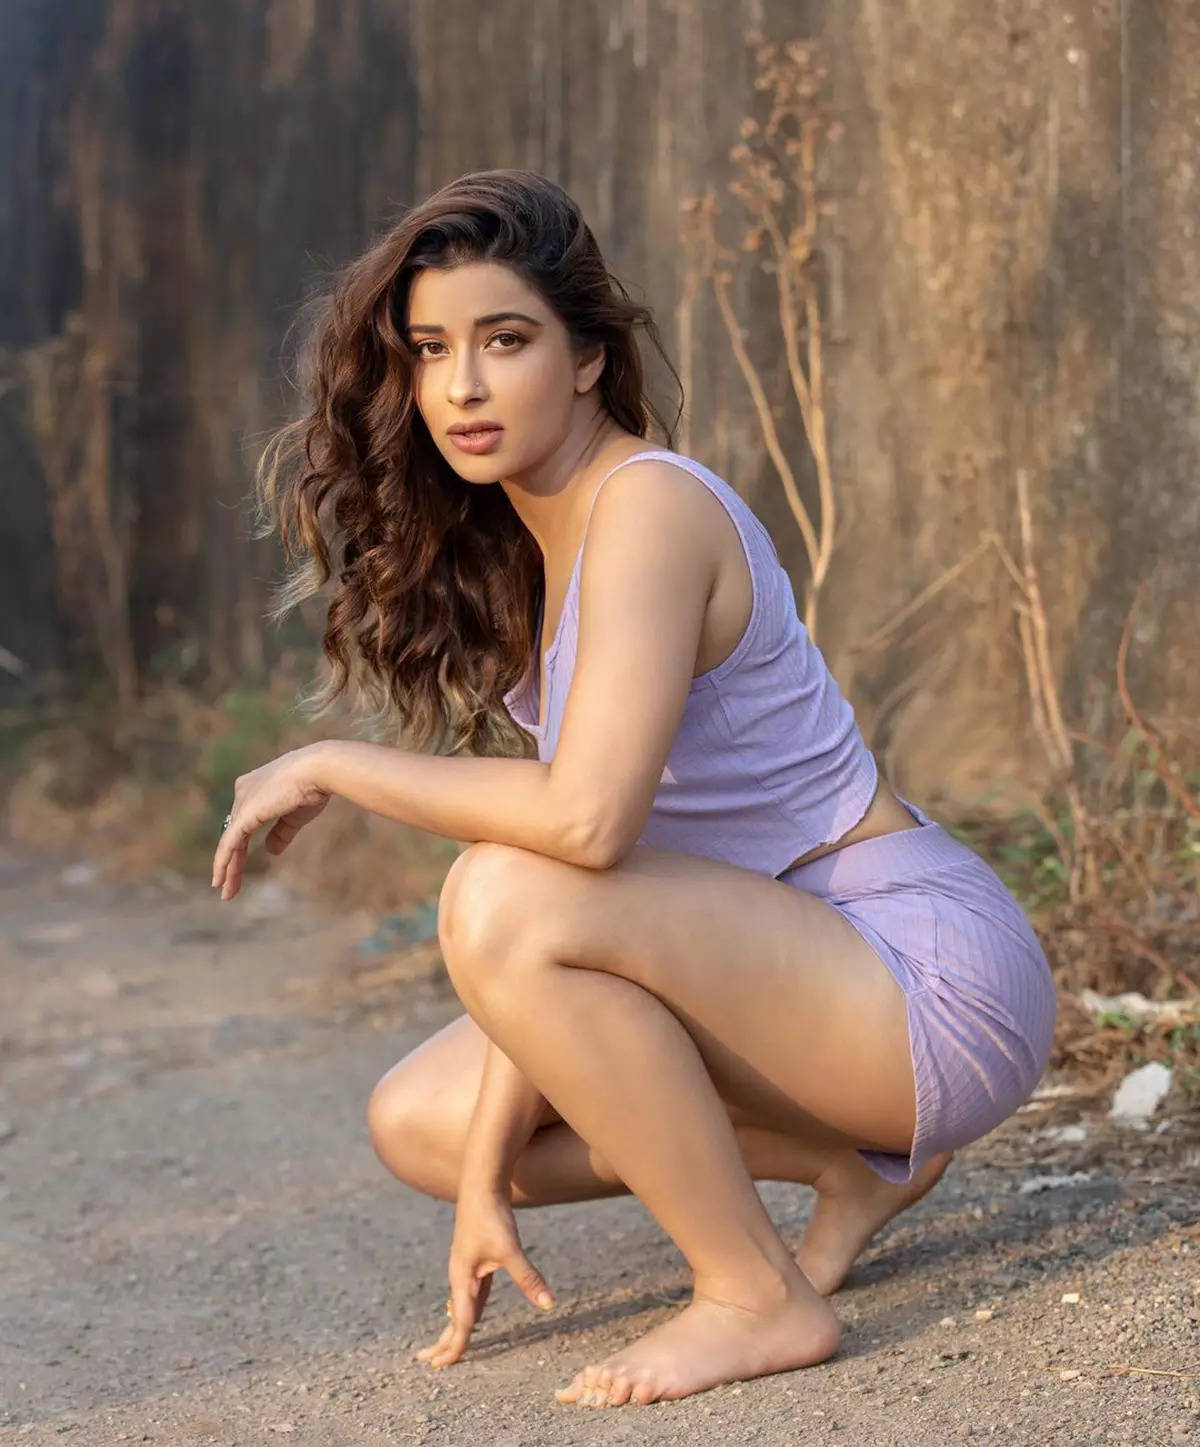 Nyra Banerjee is turning up the heat with her captivating photos